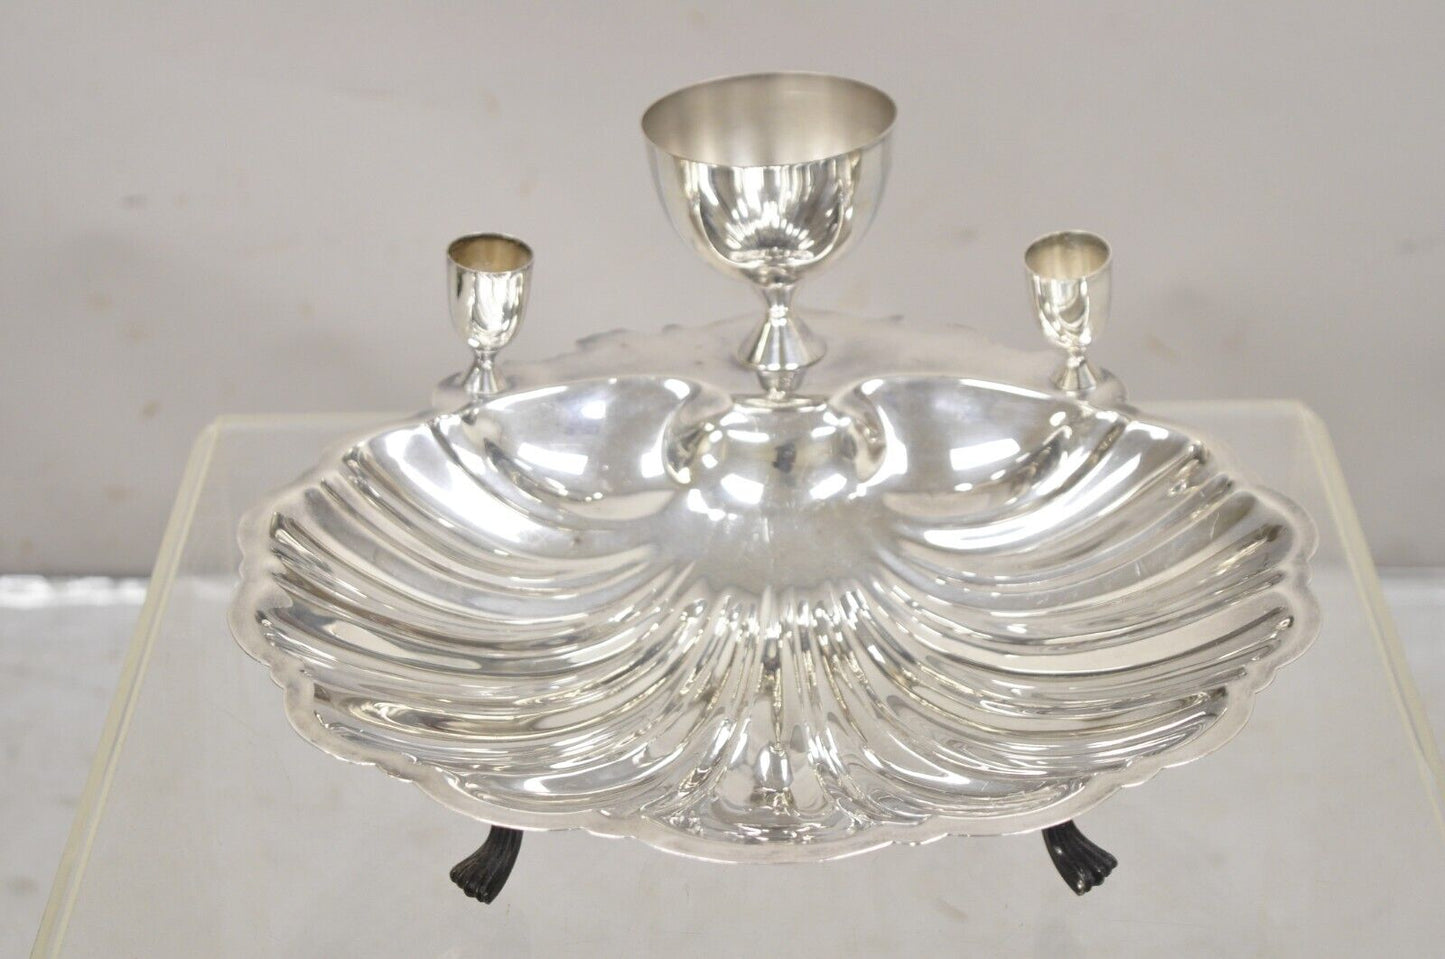 Vintage FB Rogers Silver Plated Clam Shell Seafood Bowl Platter Server